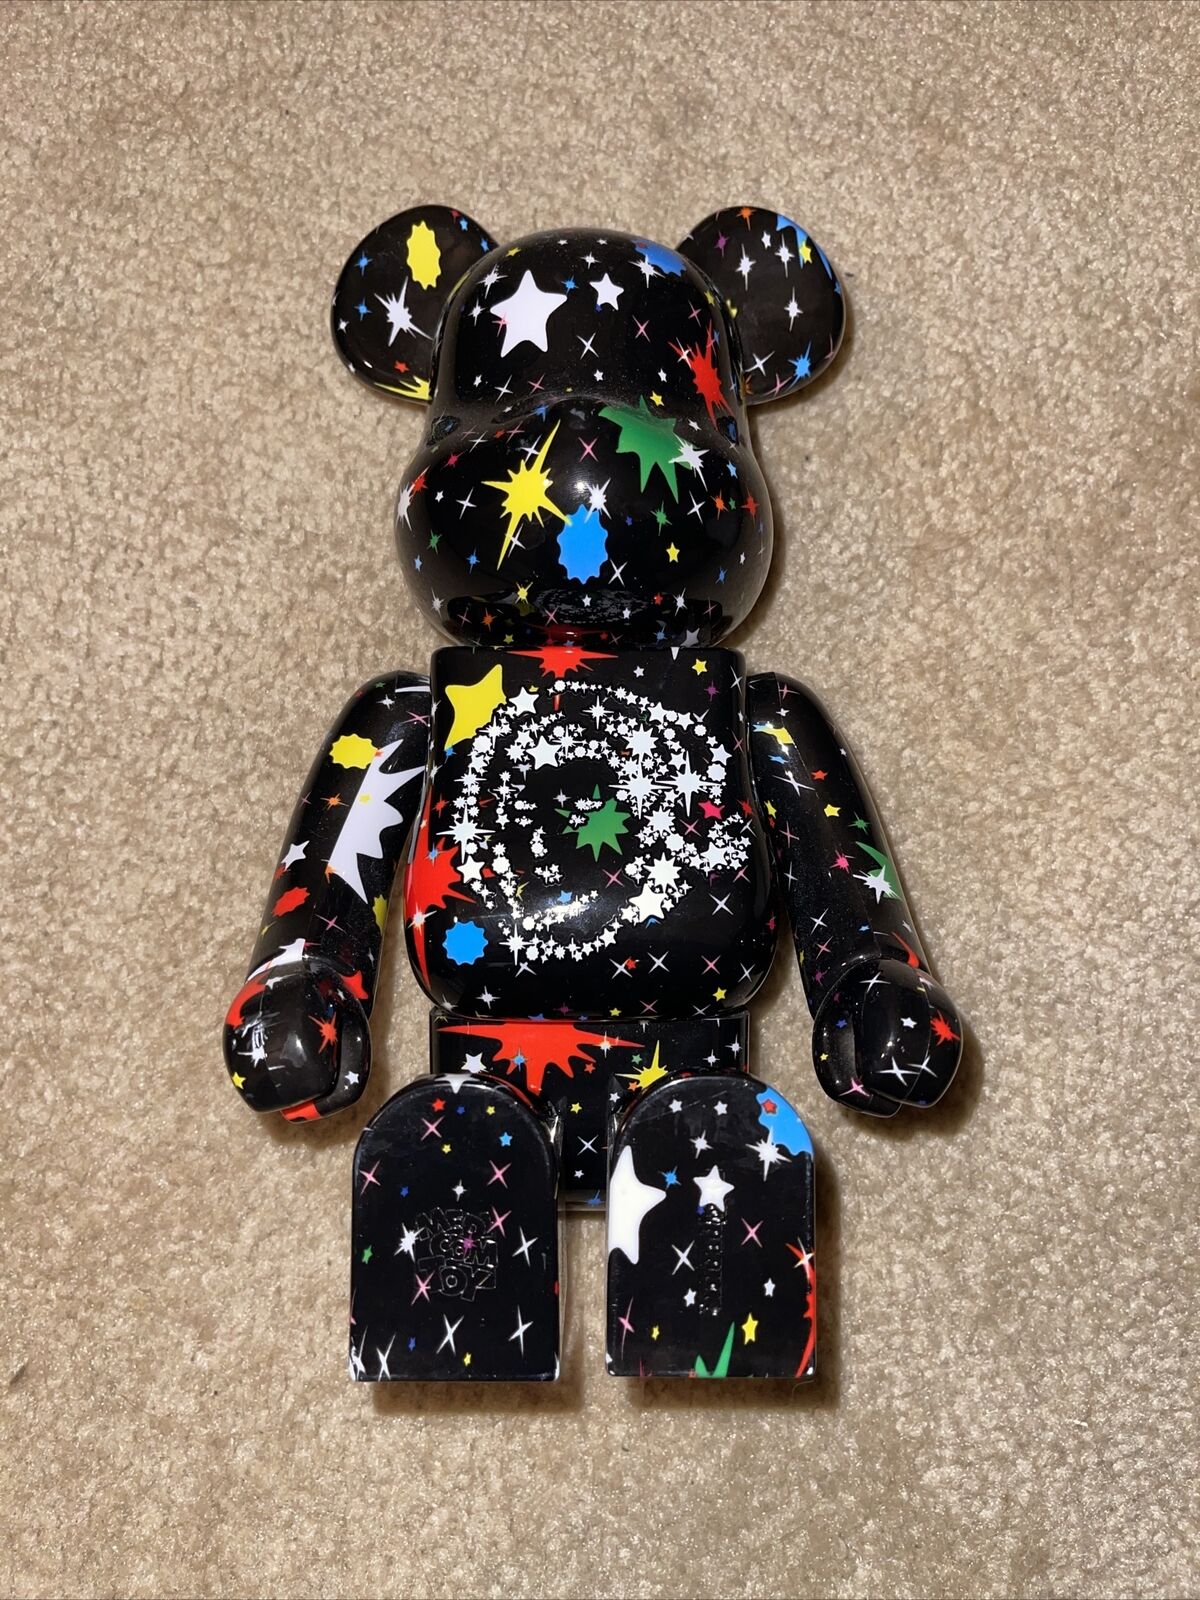 STARFIELD BEARBRICK 400% ONLY. Rare Sold out Billionaire Boys Club